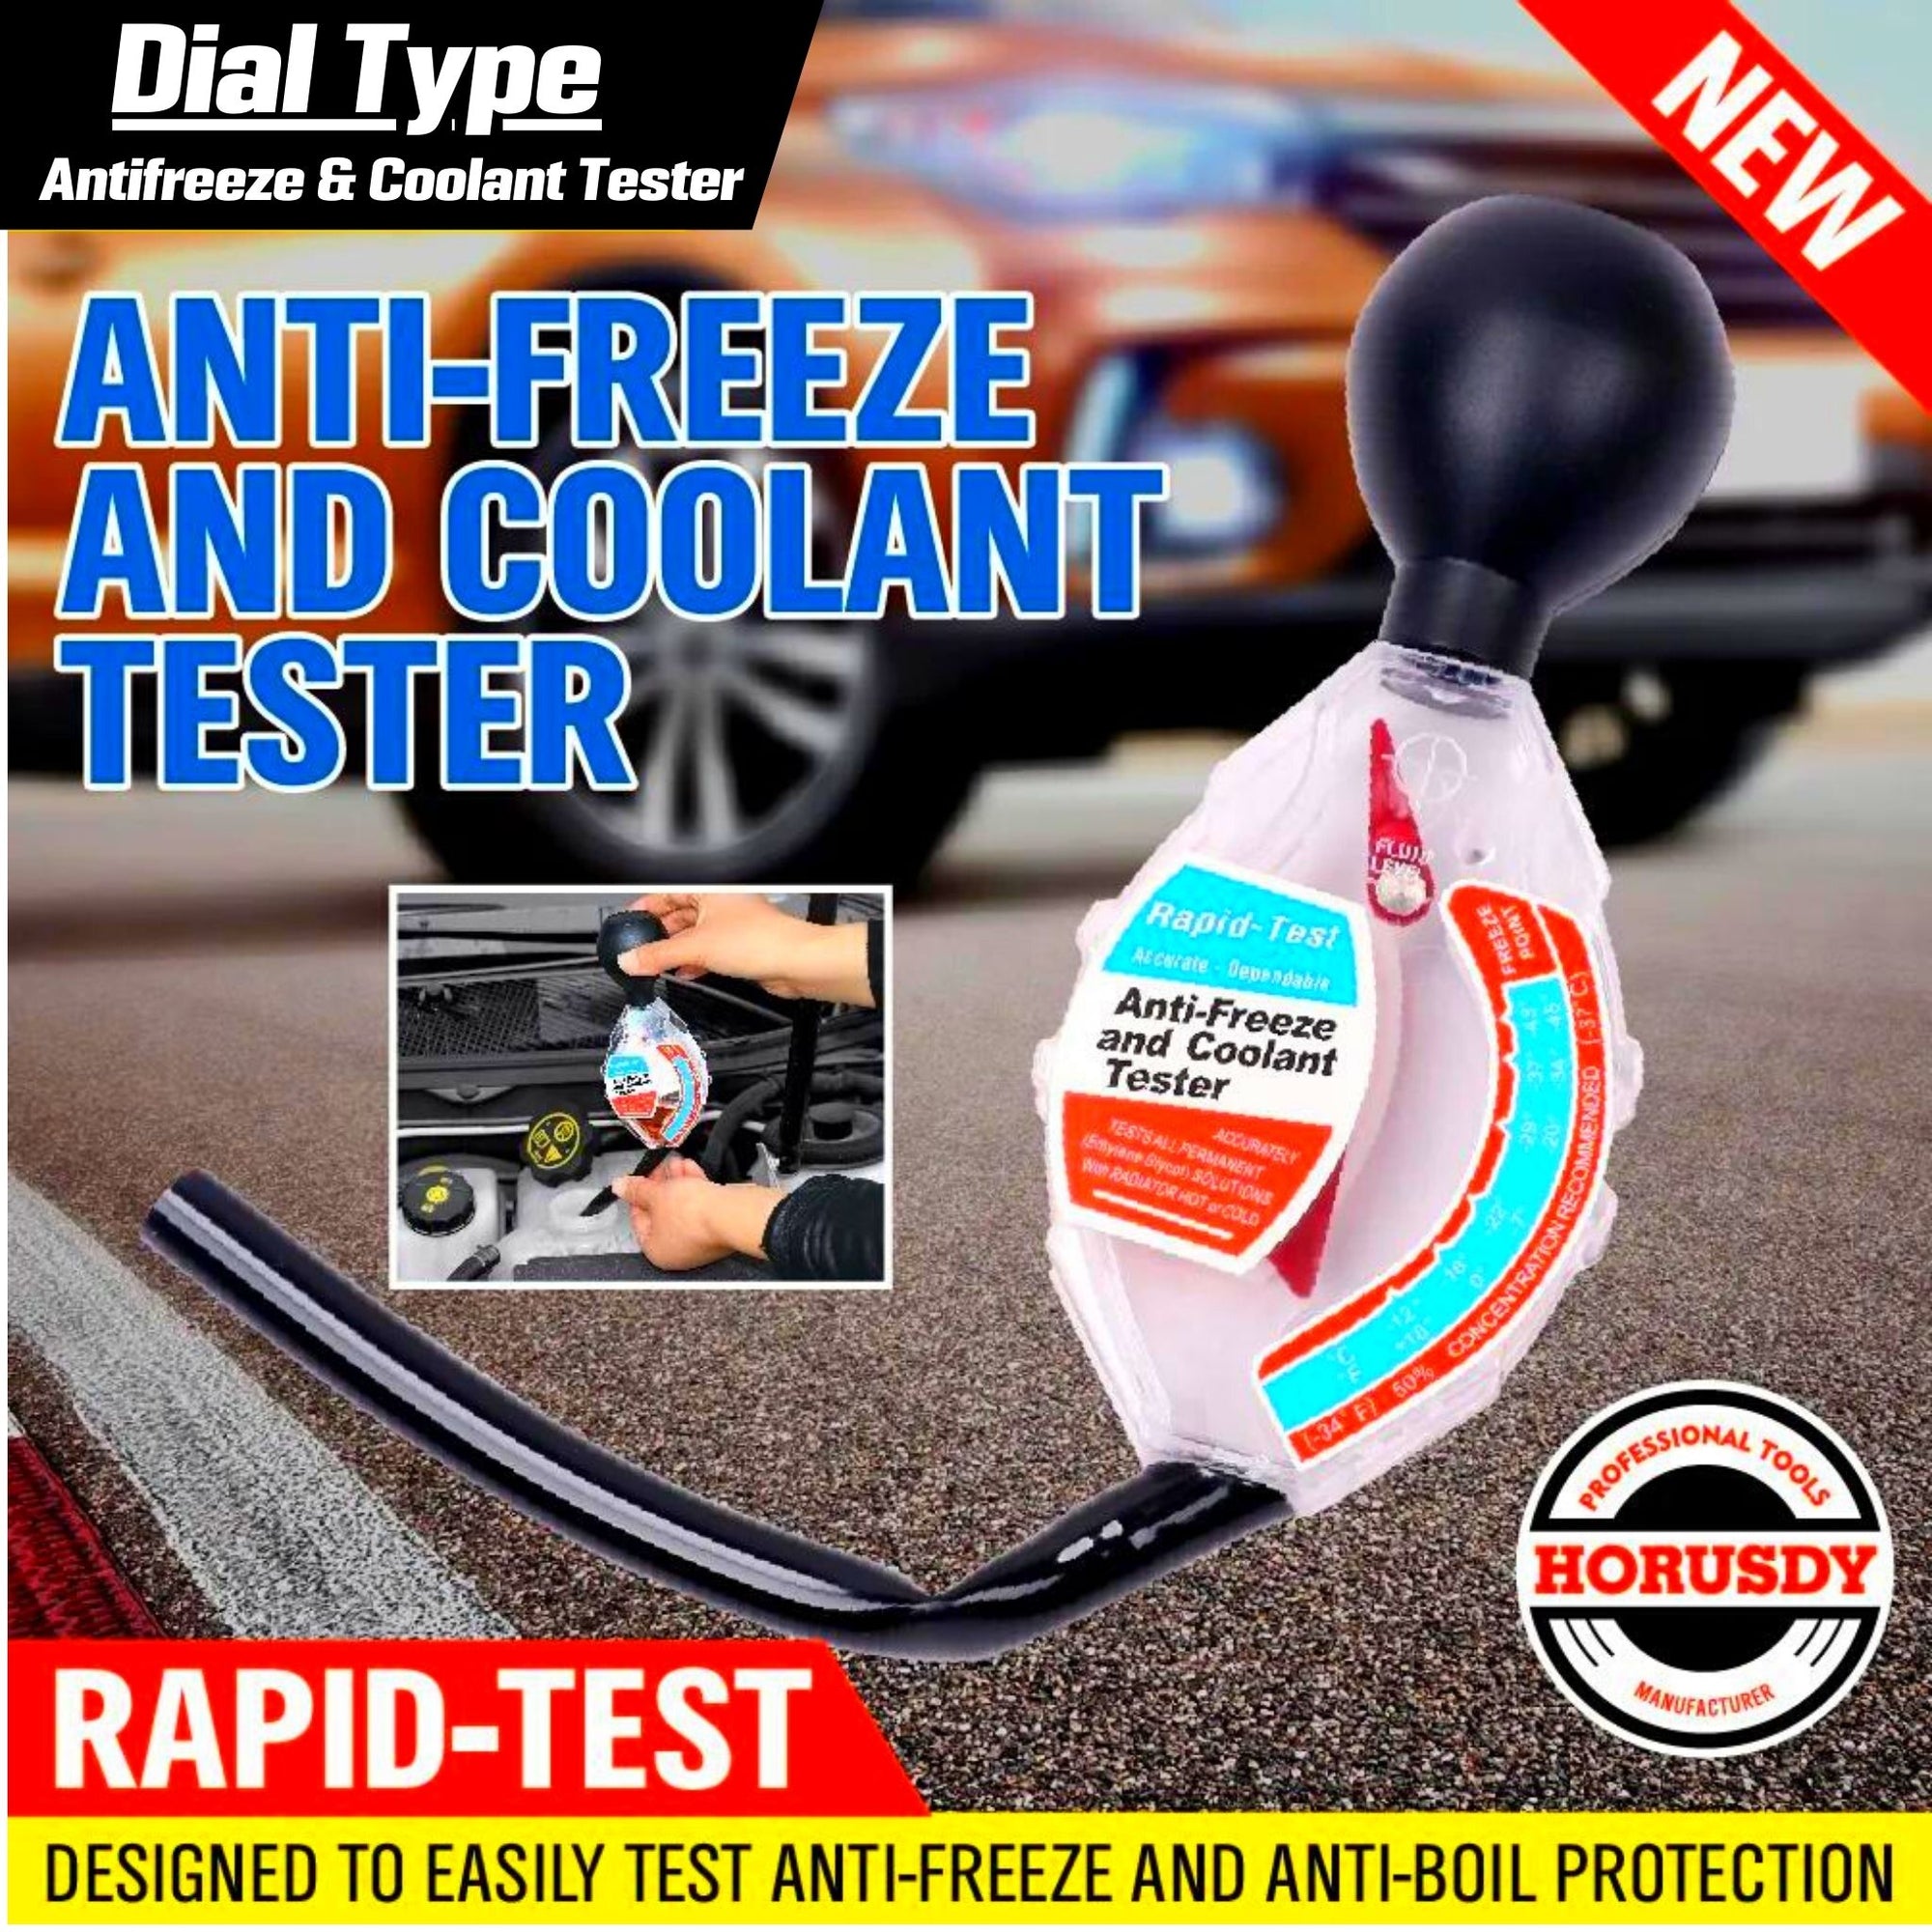 Dial Type Antifreeze & Coolant Tester - South East Clearance Centre